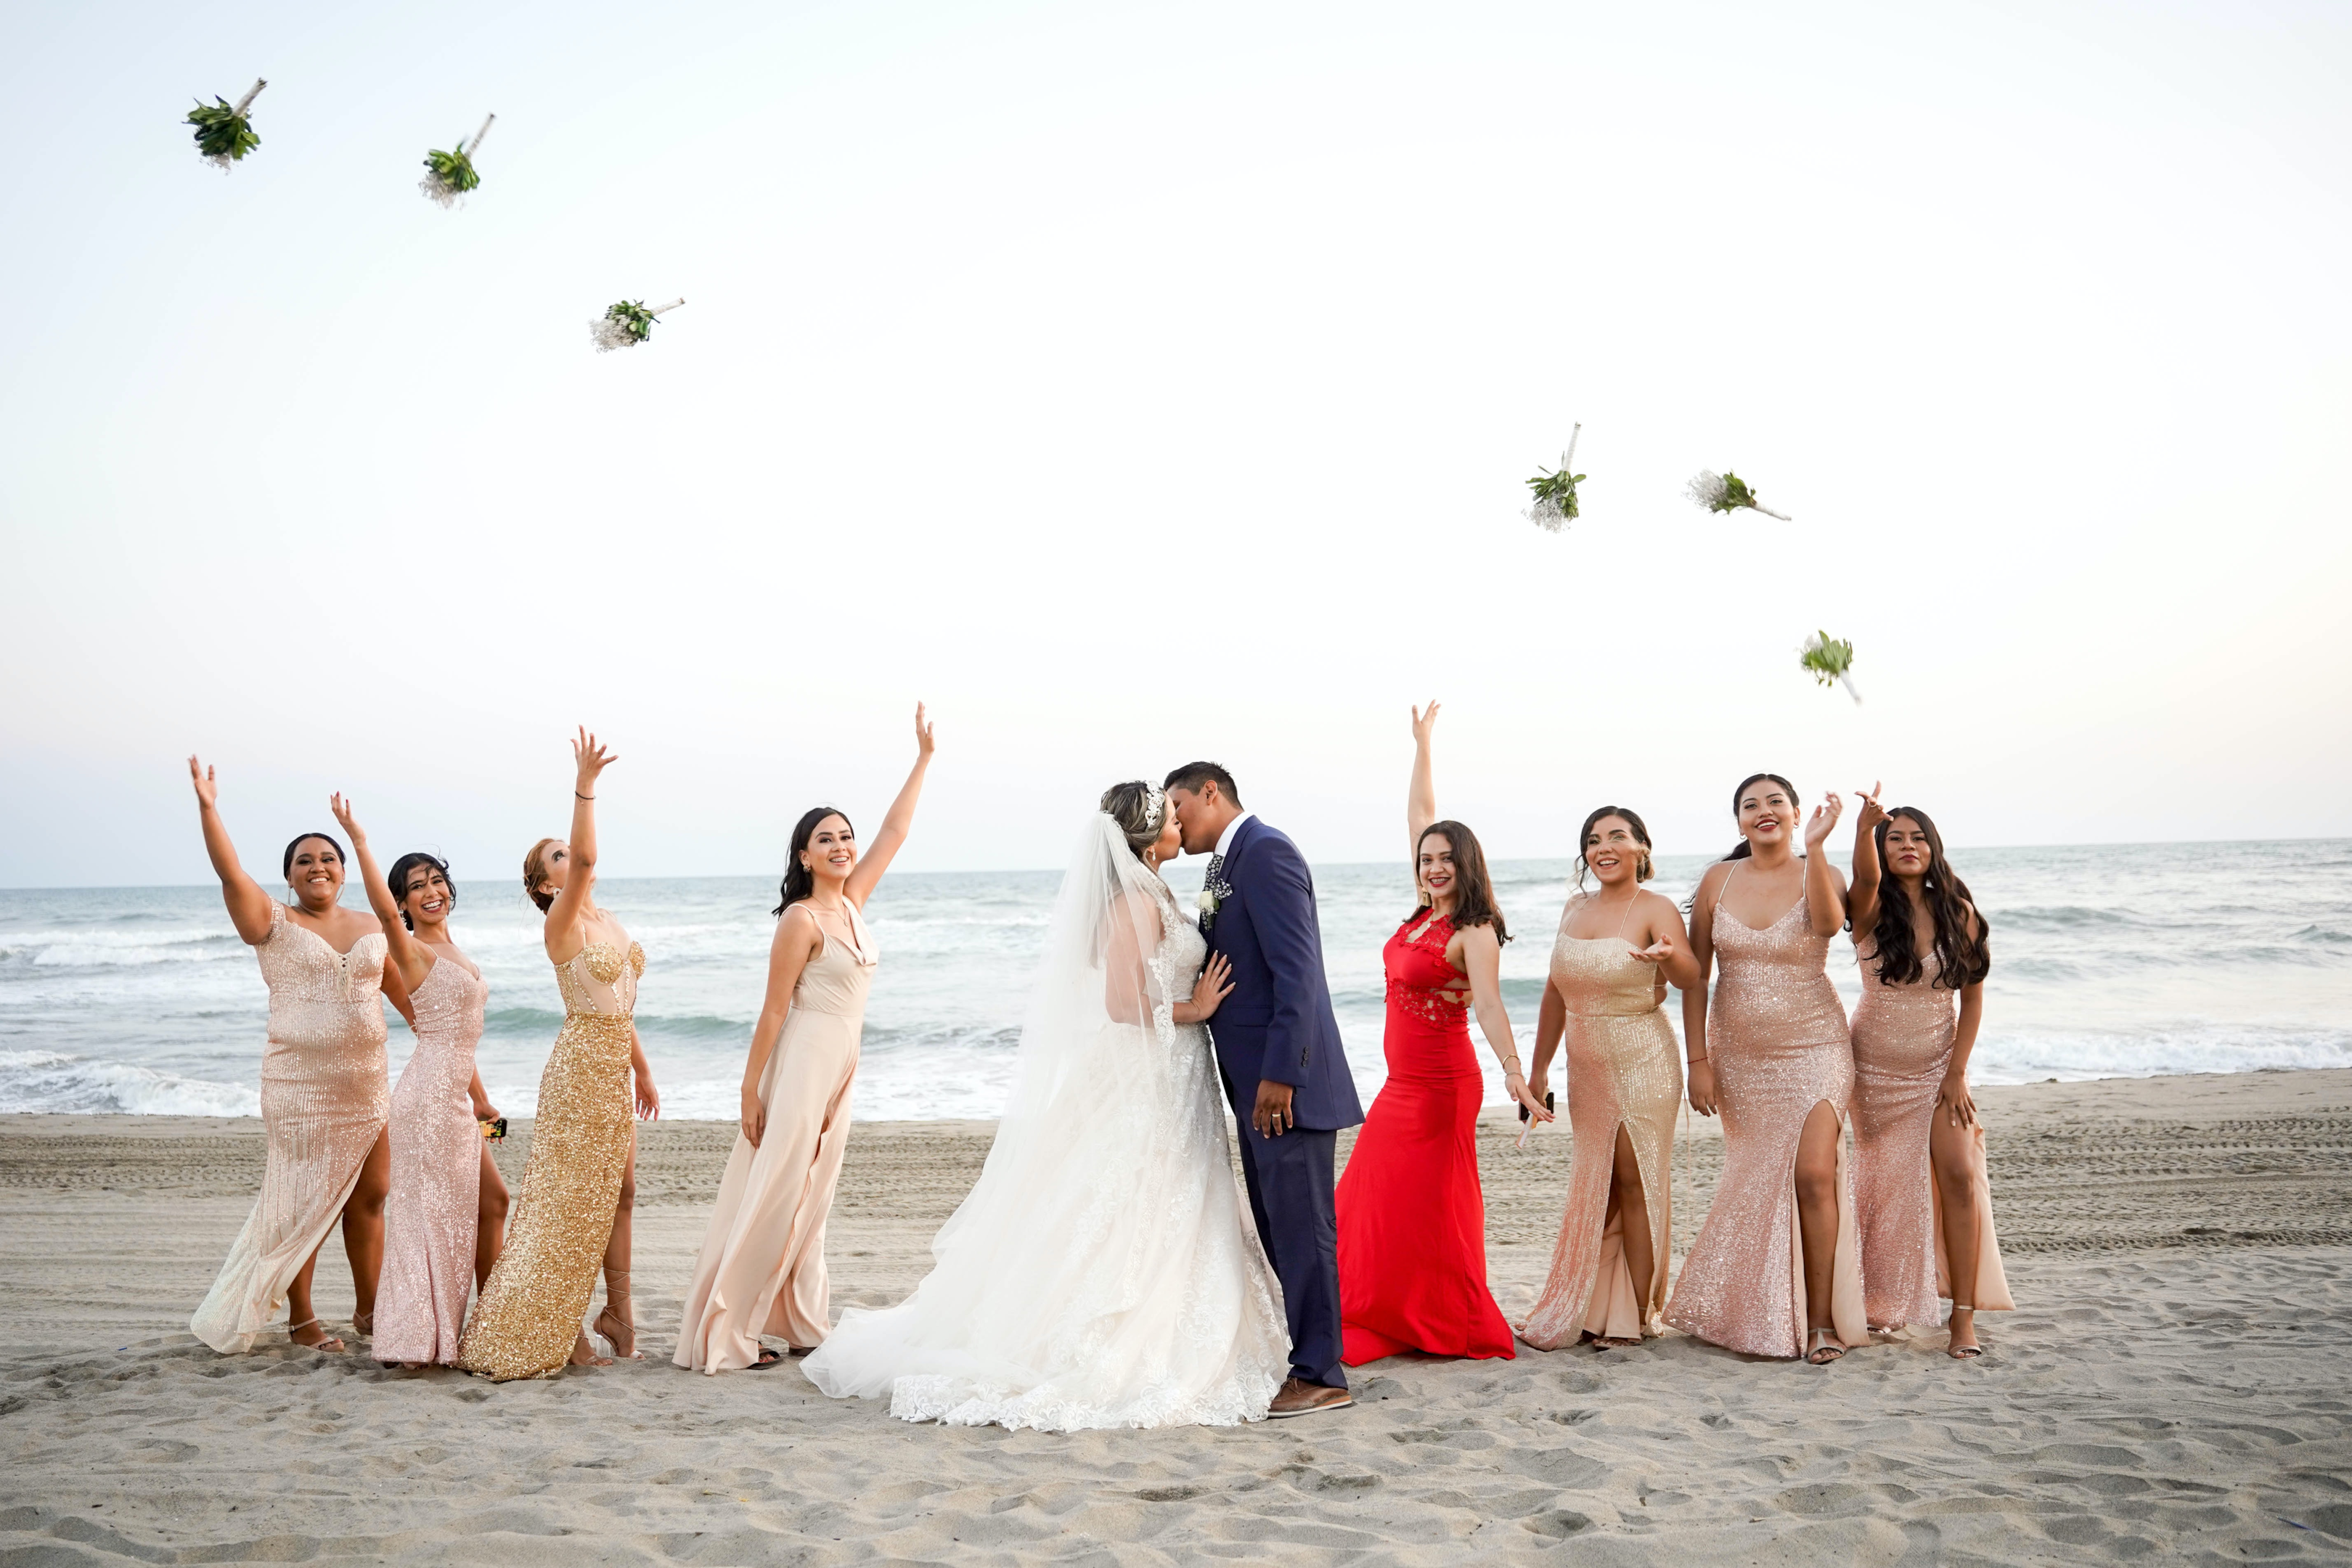 The couple is kissing on the beach, surrounded by women tossing their flowers.